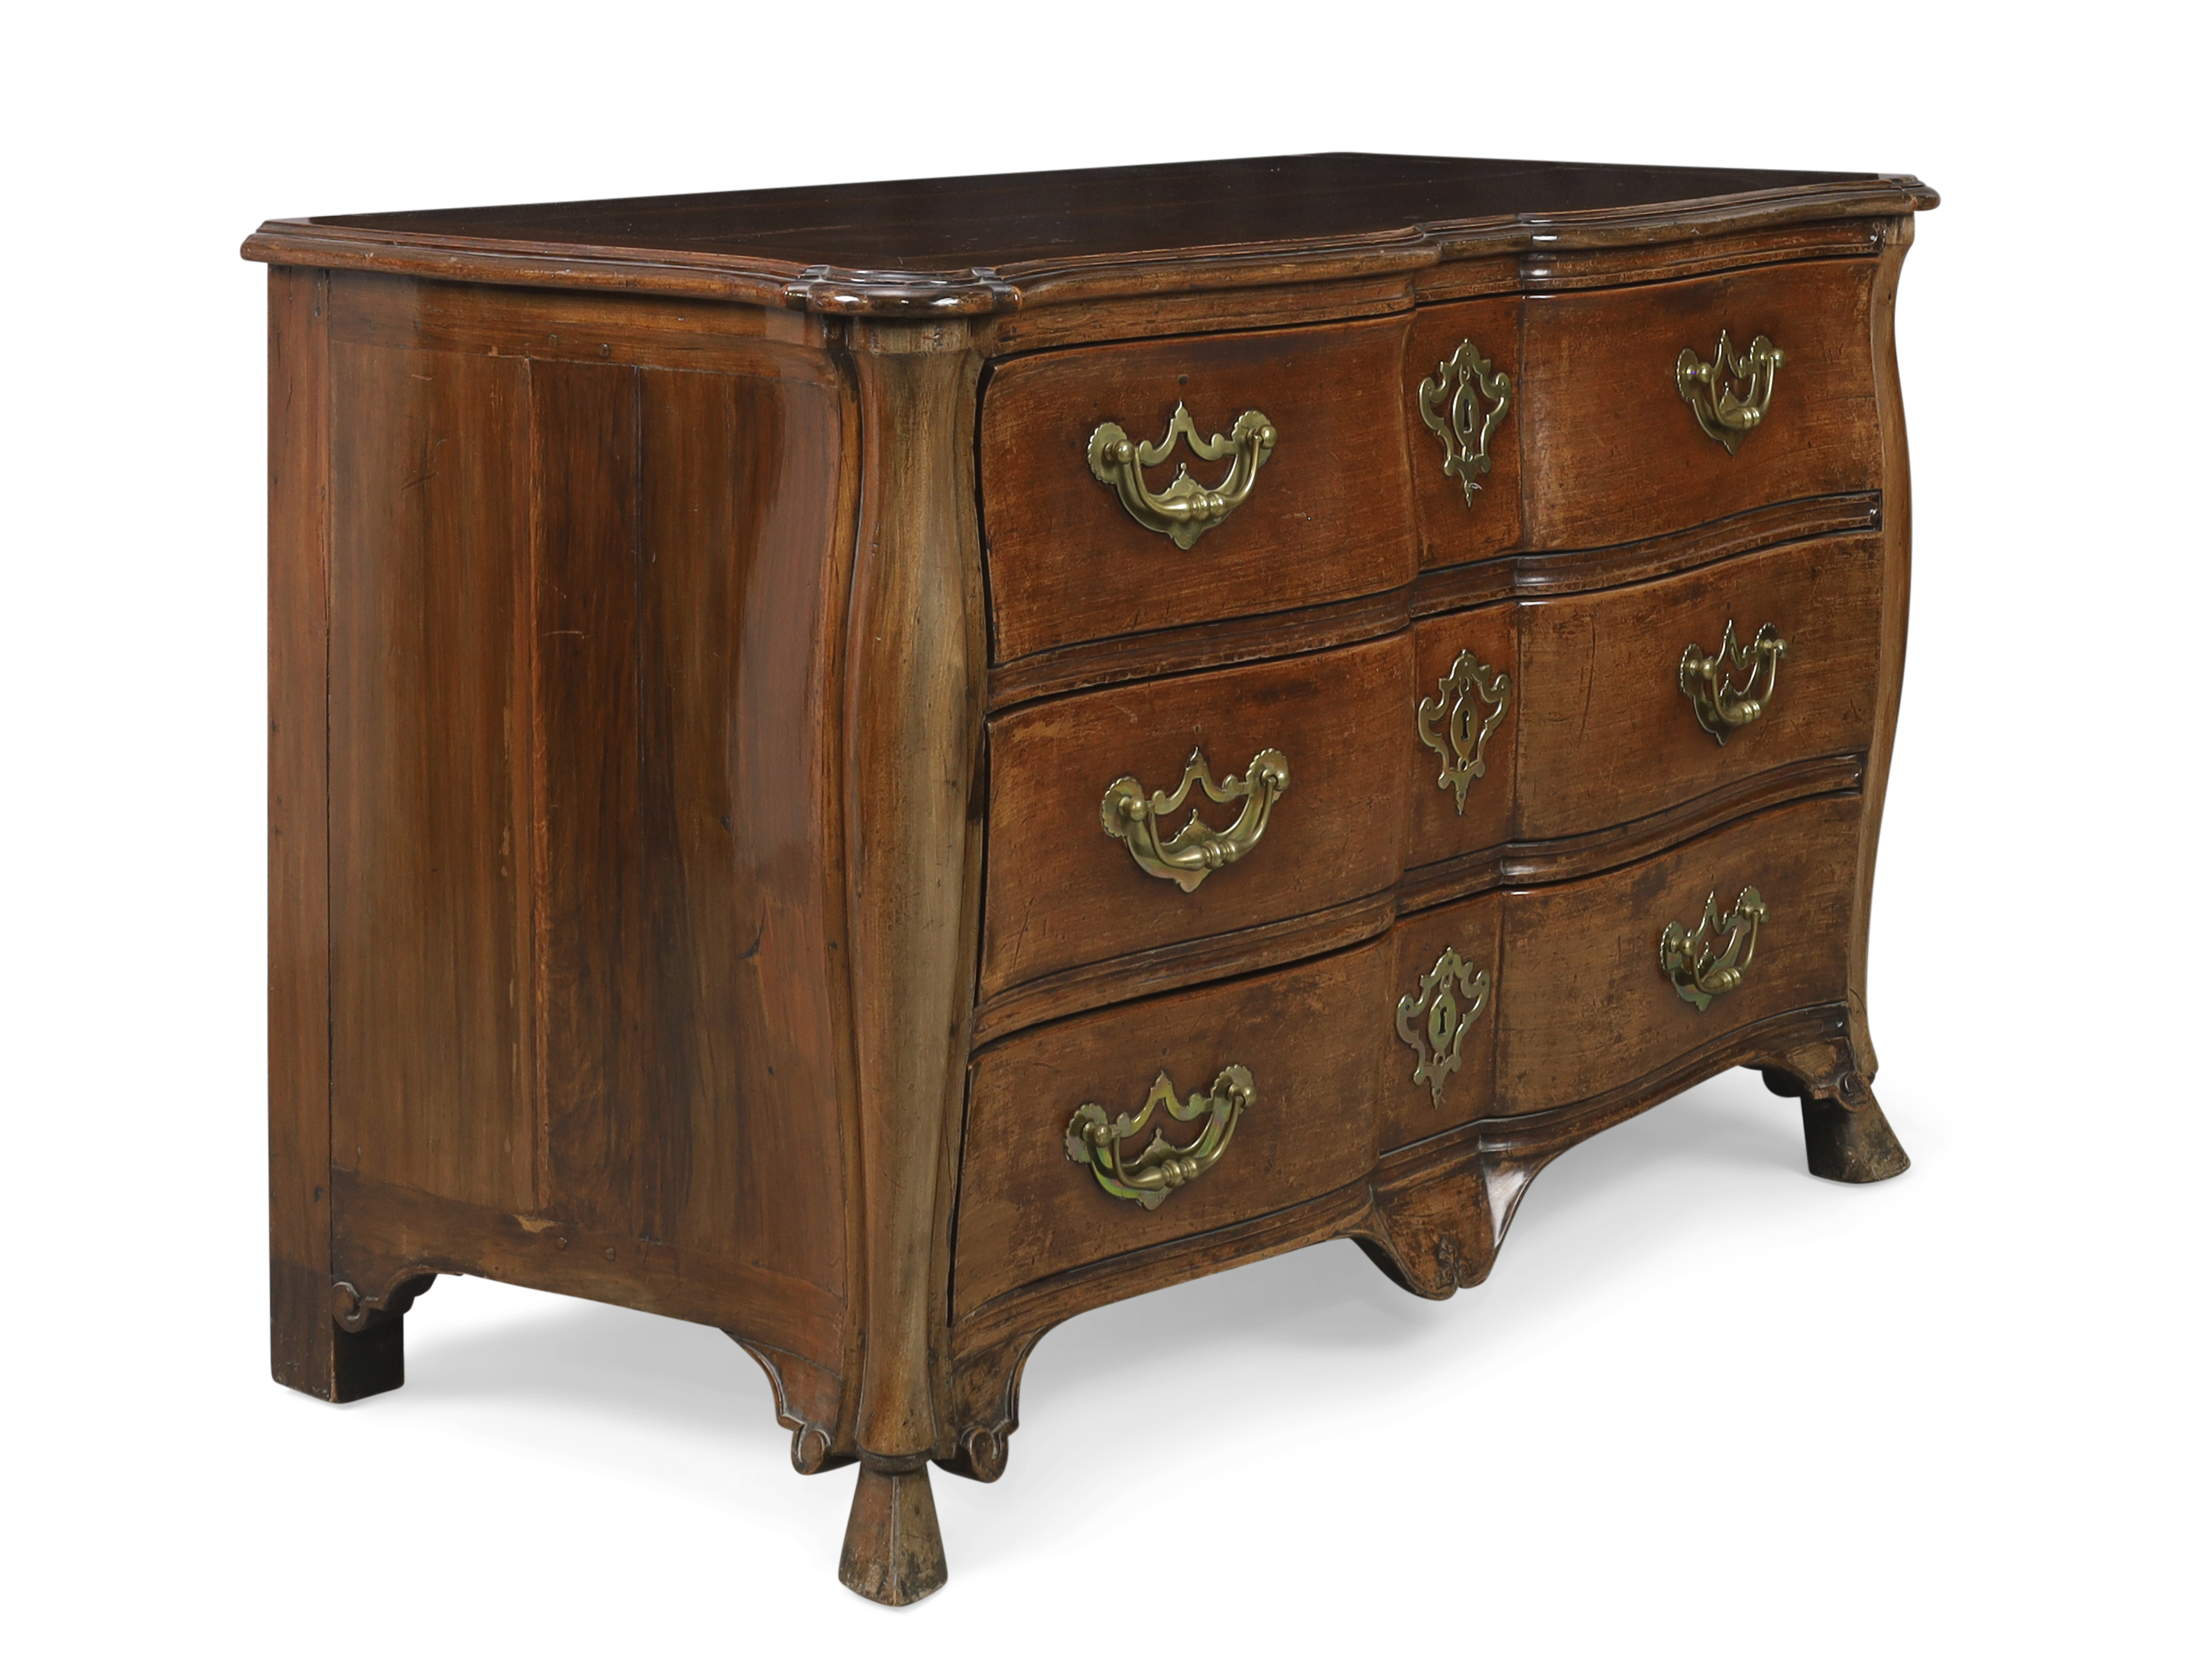 A provincial Louis XV mahogany commode, Second quarter 18th century, With three long drawers, on ... - Image 2 of 4